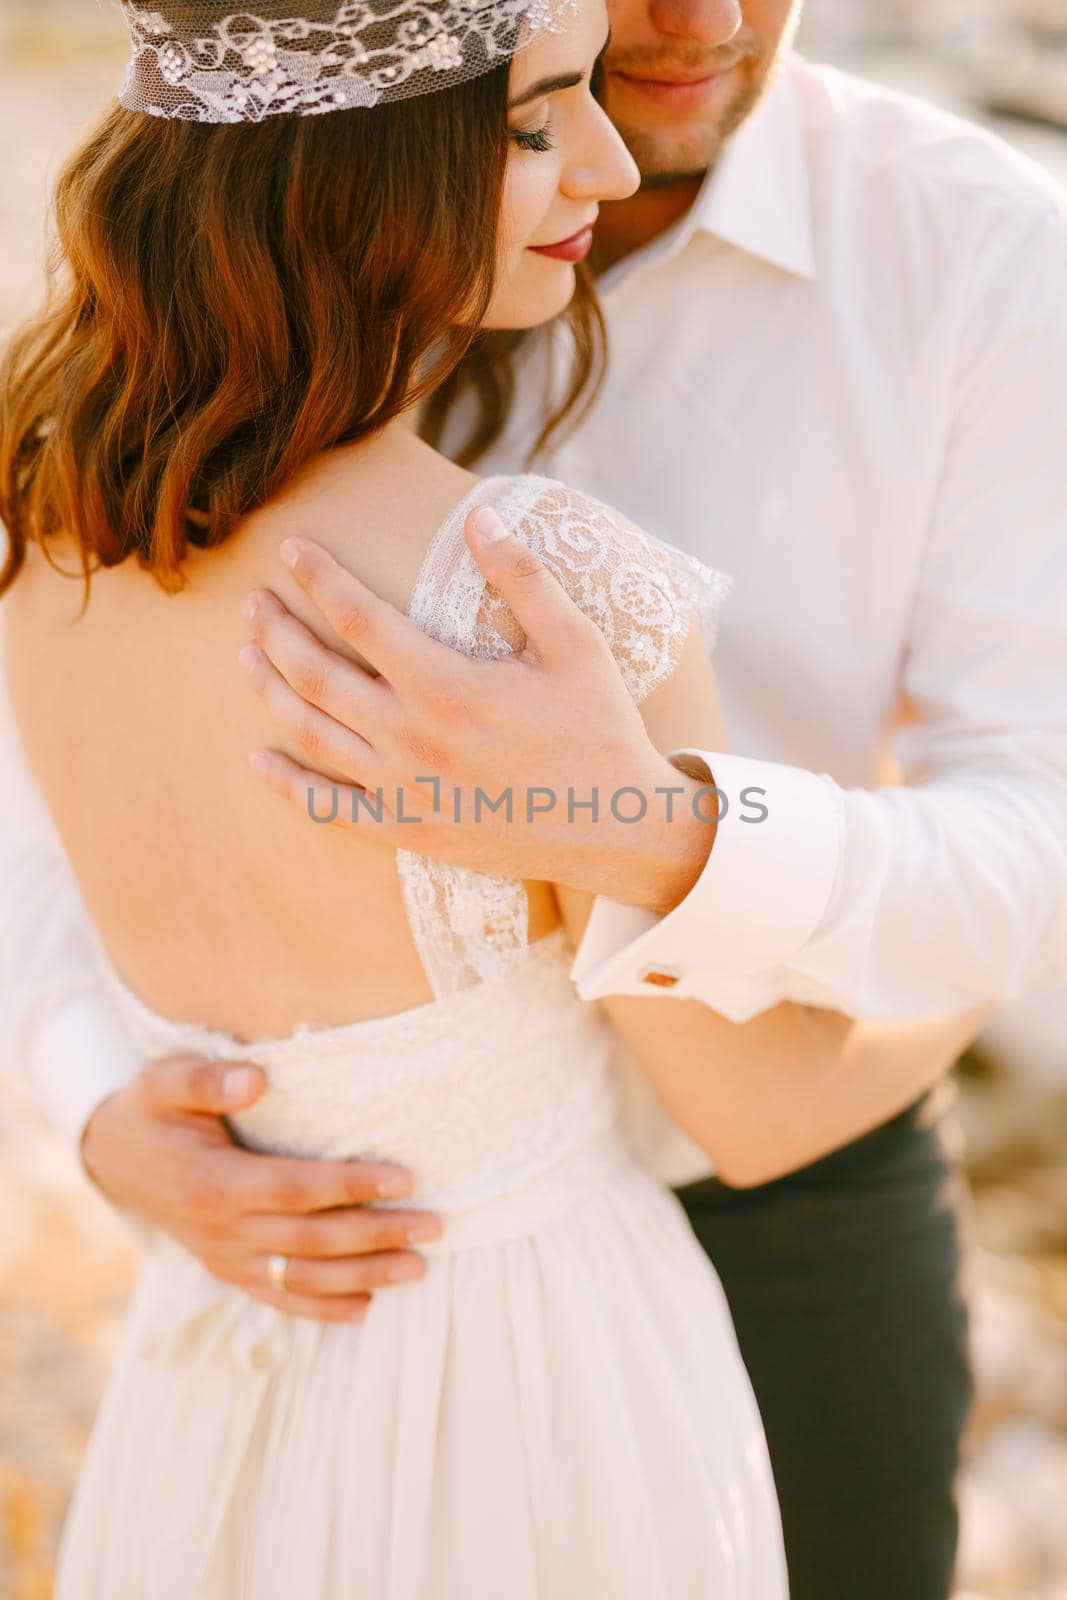 The bride and groom tenderly hug , the groom put his hands on the back of the bride by Nadtochiy